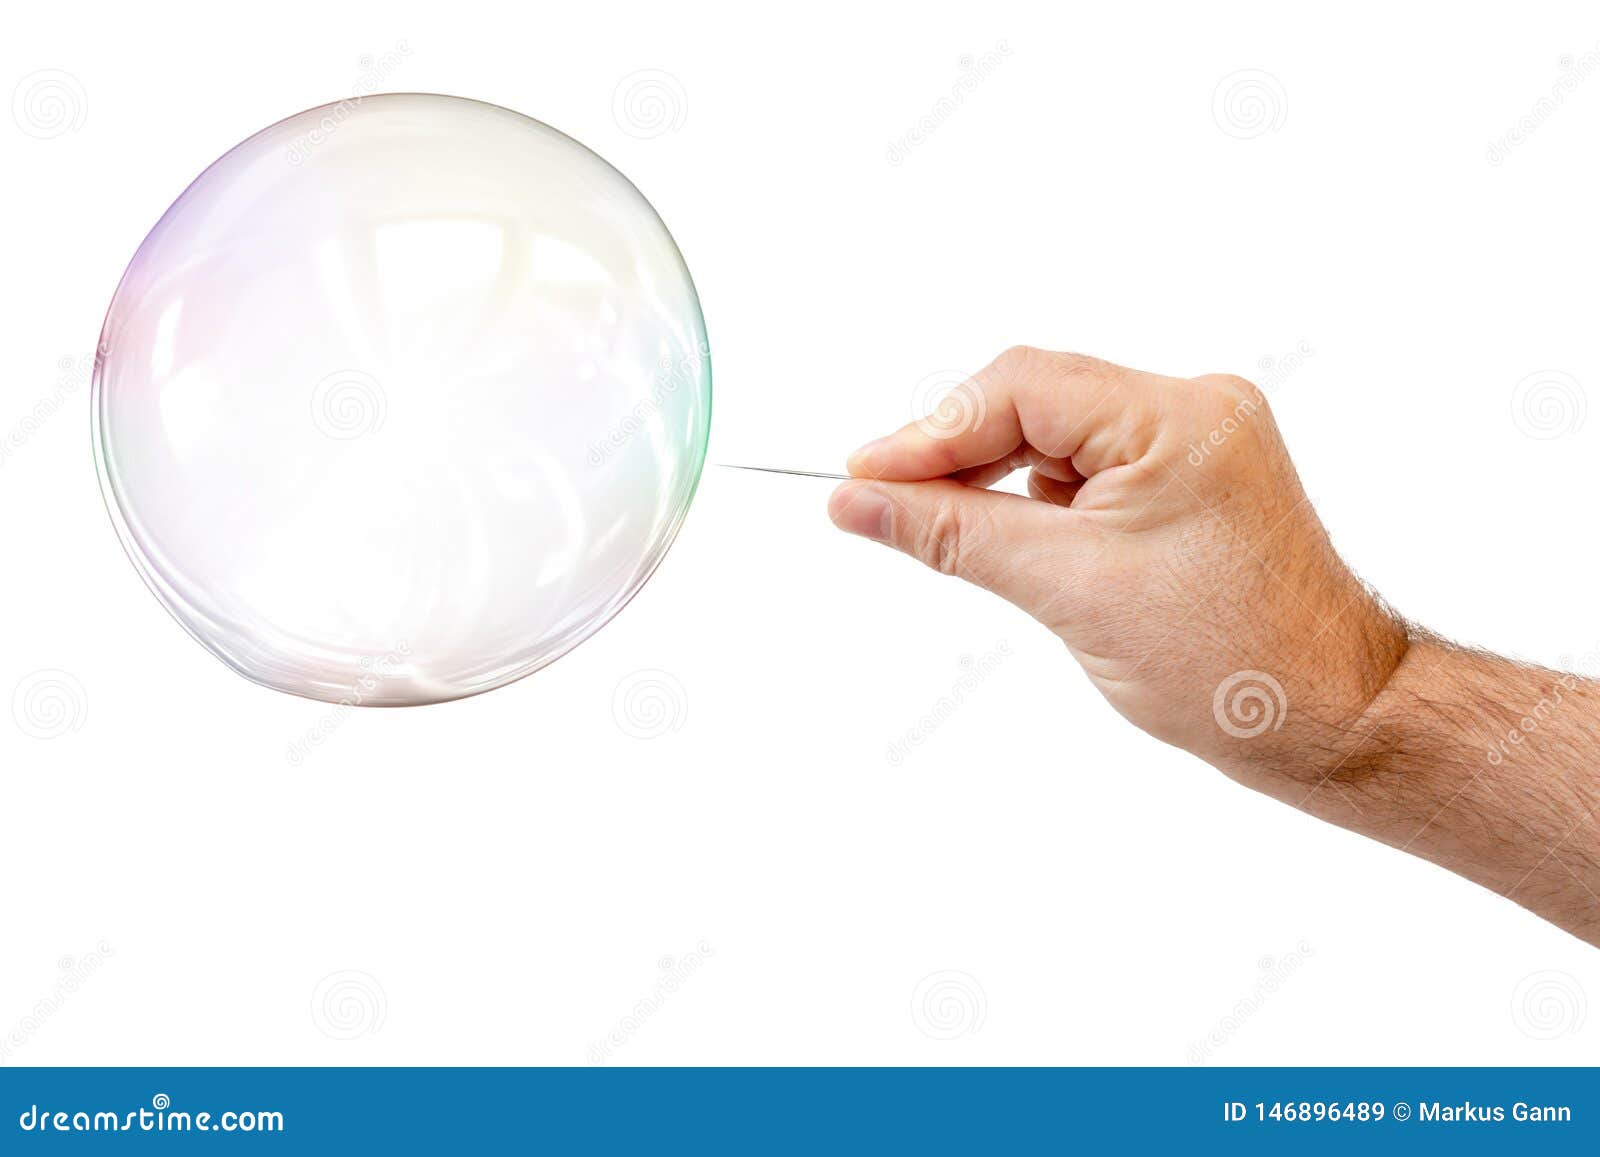 Soap Bubble and a Males Hand with Needle To Let it Pop Stock Image - Image of global: 146896489